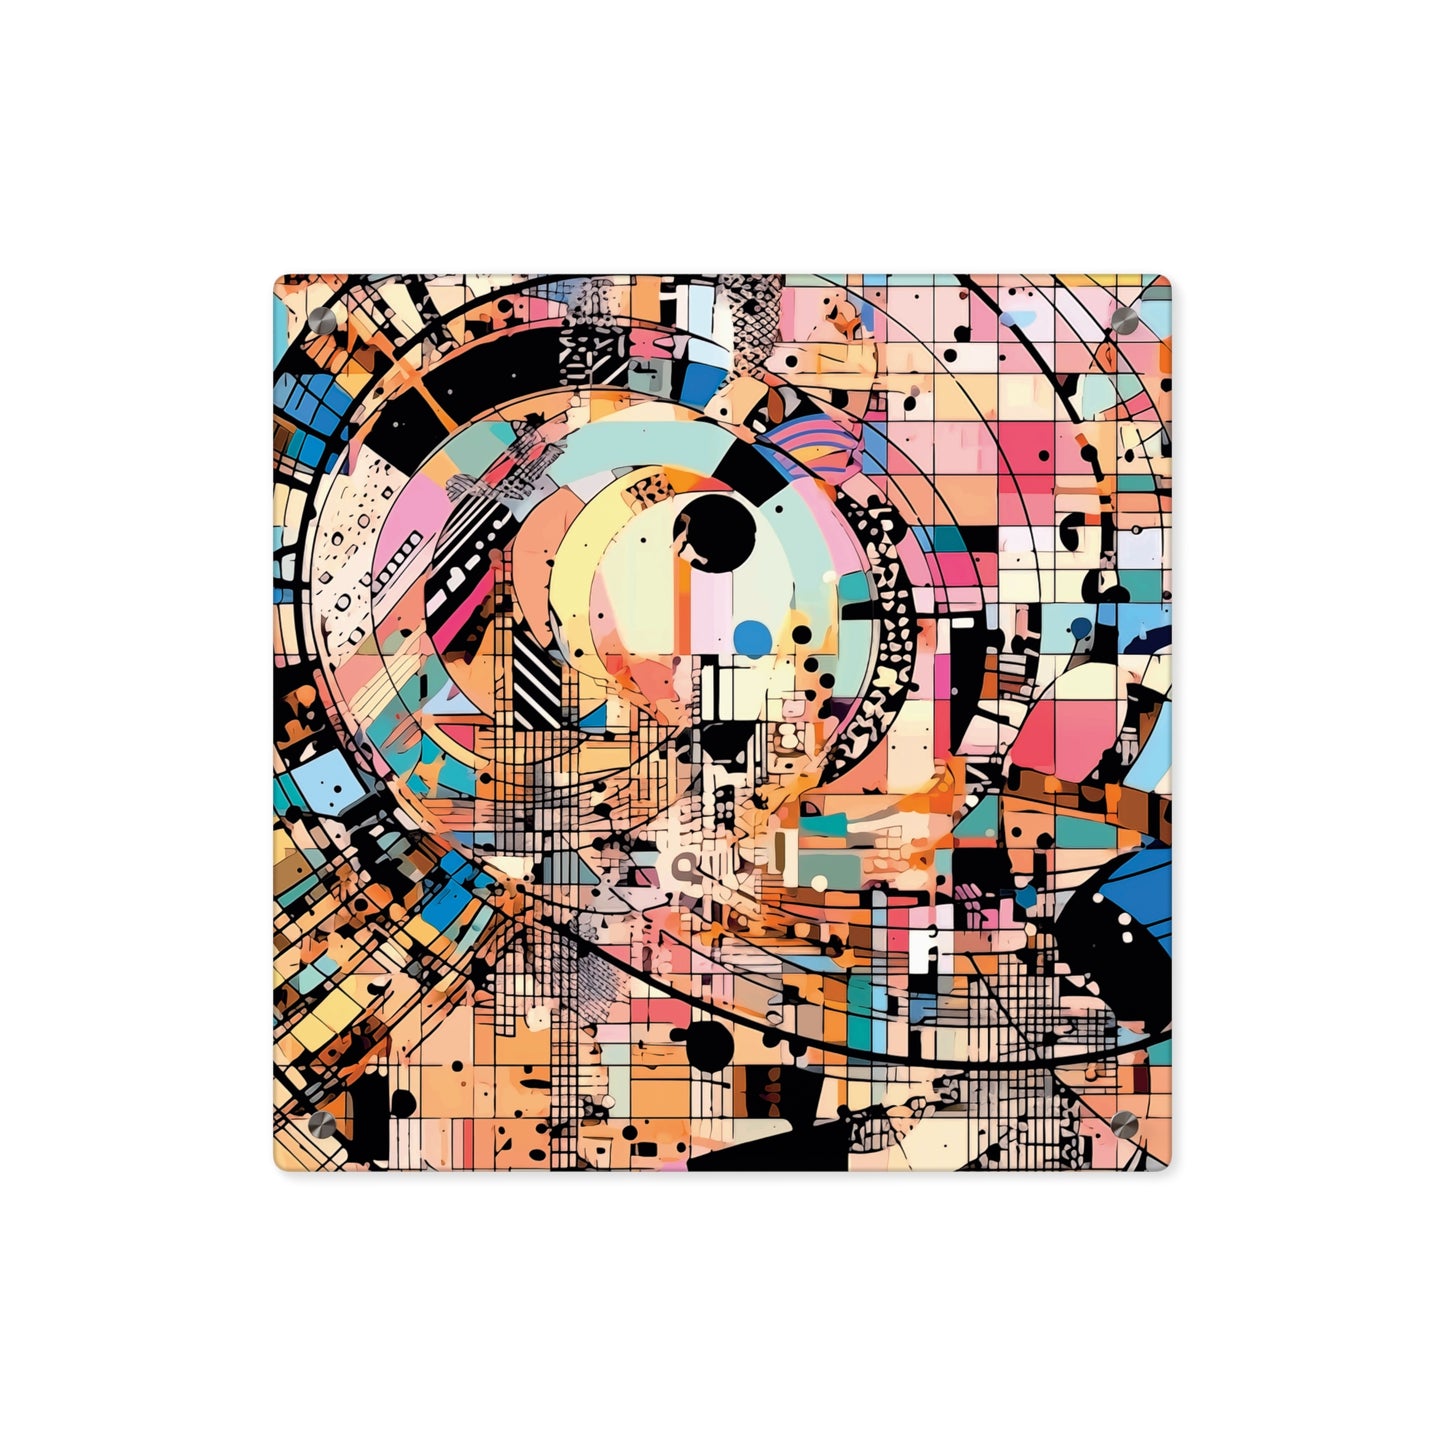 Space: In Summary Spiral Sequence Acrylic Wall Art